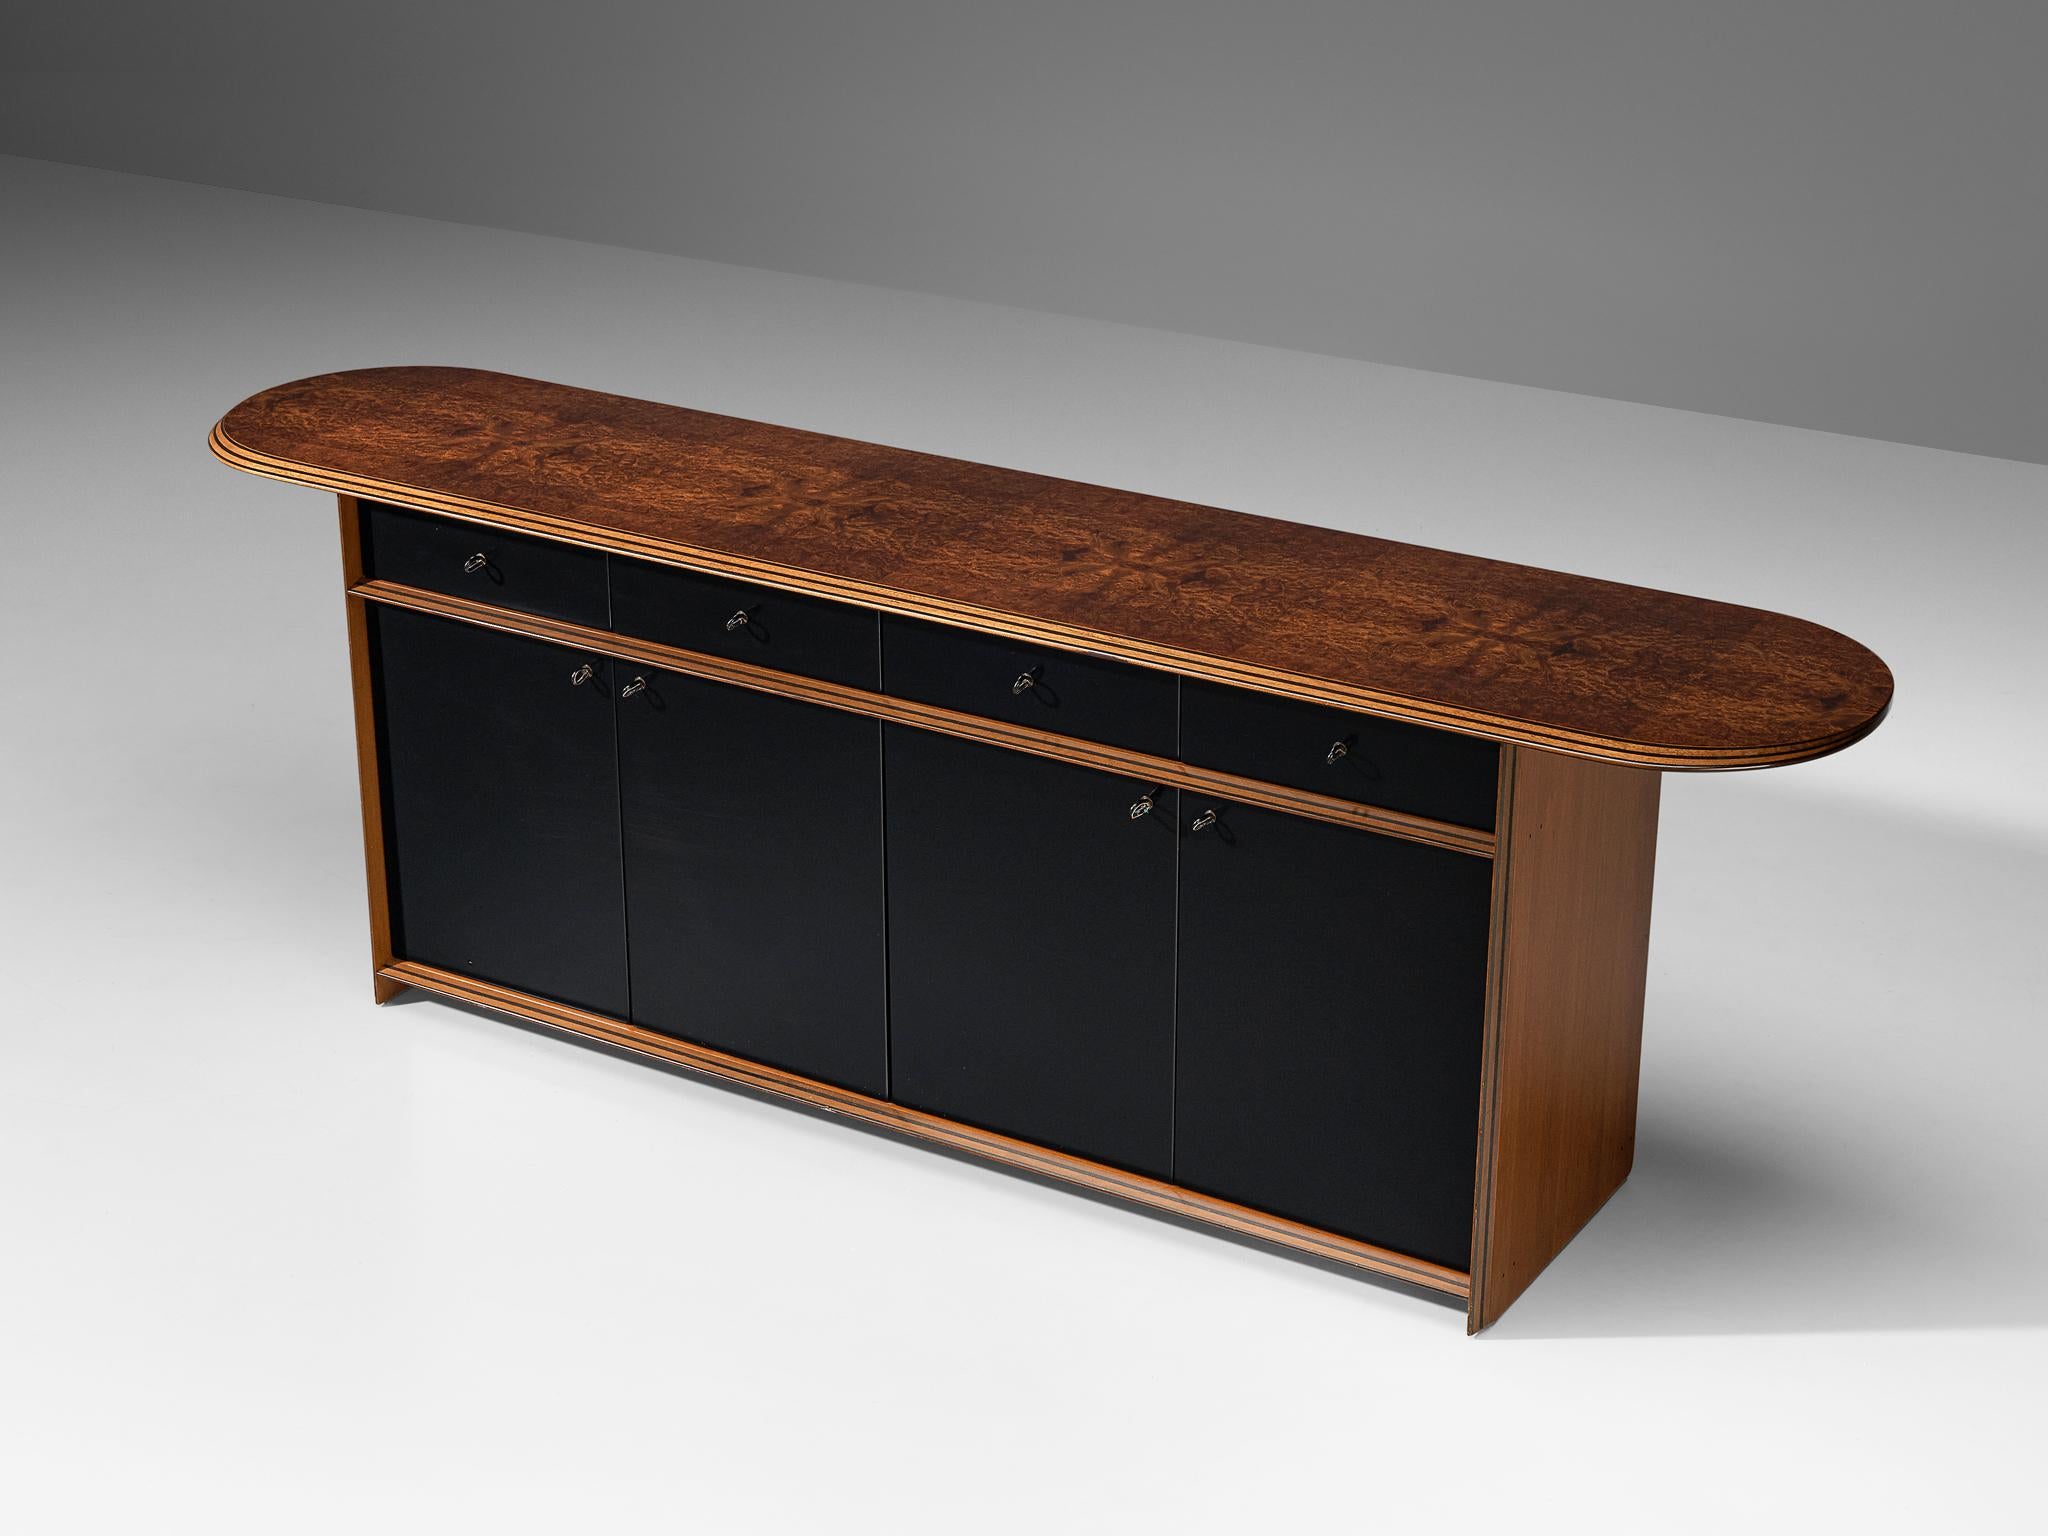 Afra & Tobia Scarpa for Maxalto, sideboard, model 'Artona', walnut, burlwood, lacquered wood, leather, Italy, 1975/1979

Gorgeous sideboard designed by duo Afra and Tobia Scarpa in the 1970s. This sideboard is designed as part of the ‘Artona’ line.